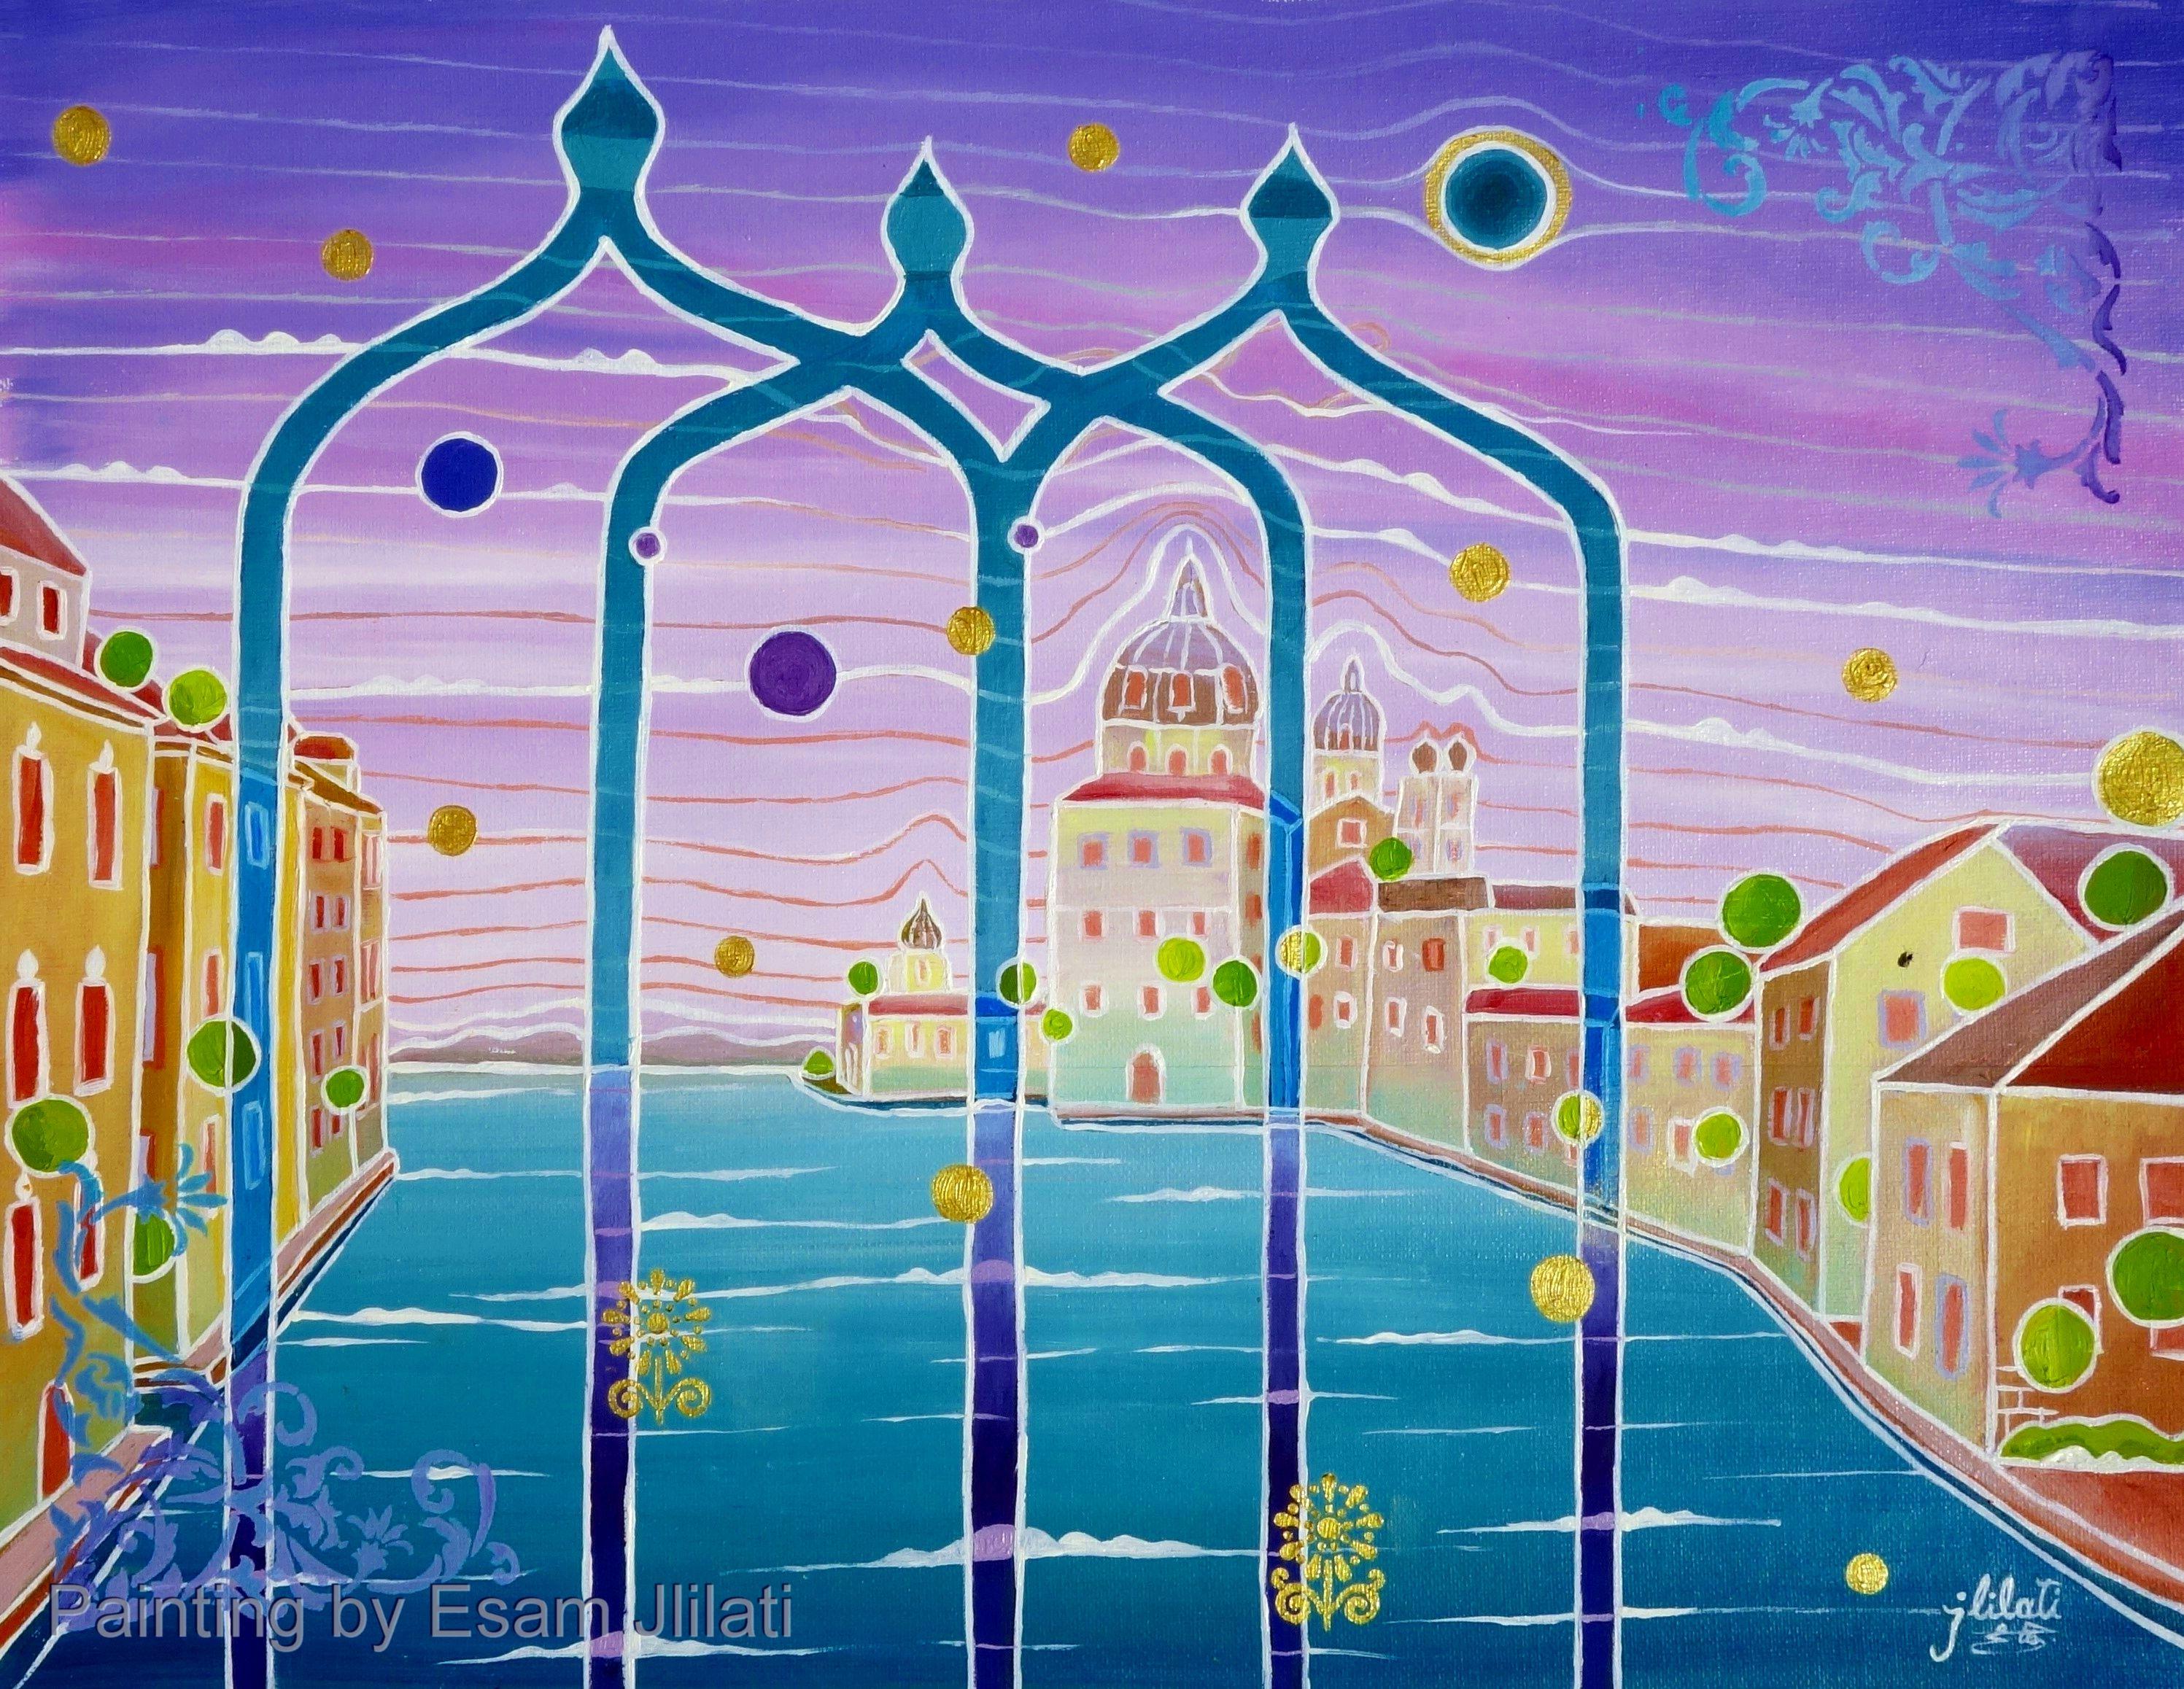 Esam Jlilati Abstract Painting - Venice original oil color surreal artwork, Painting, Oil on Canvas